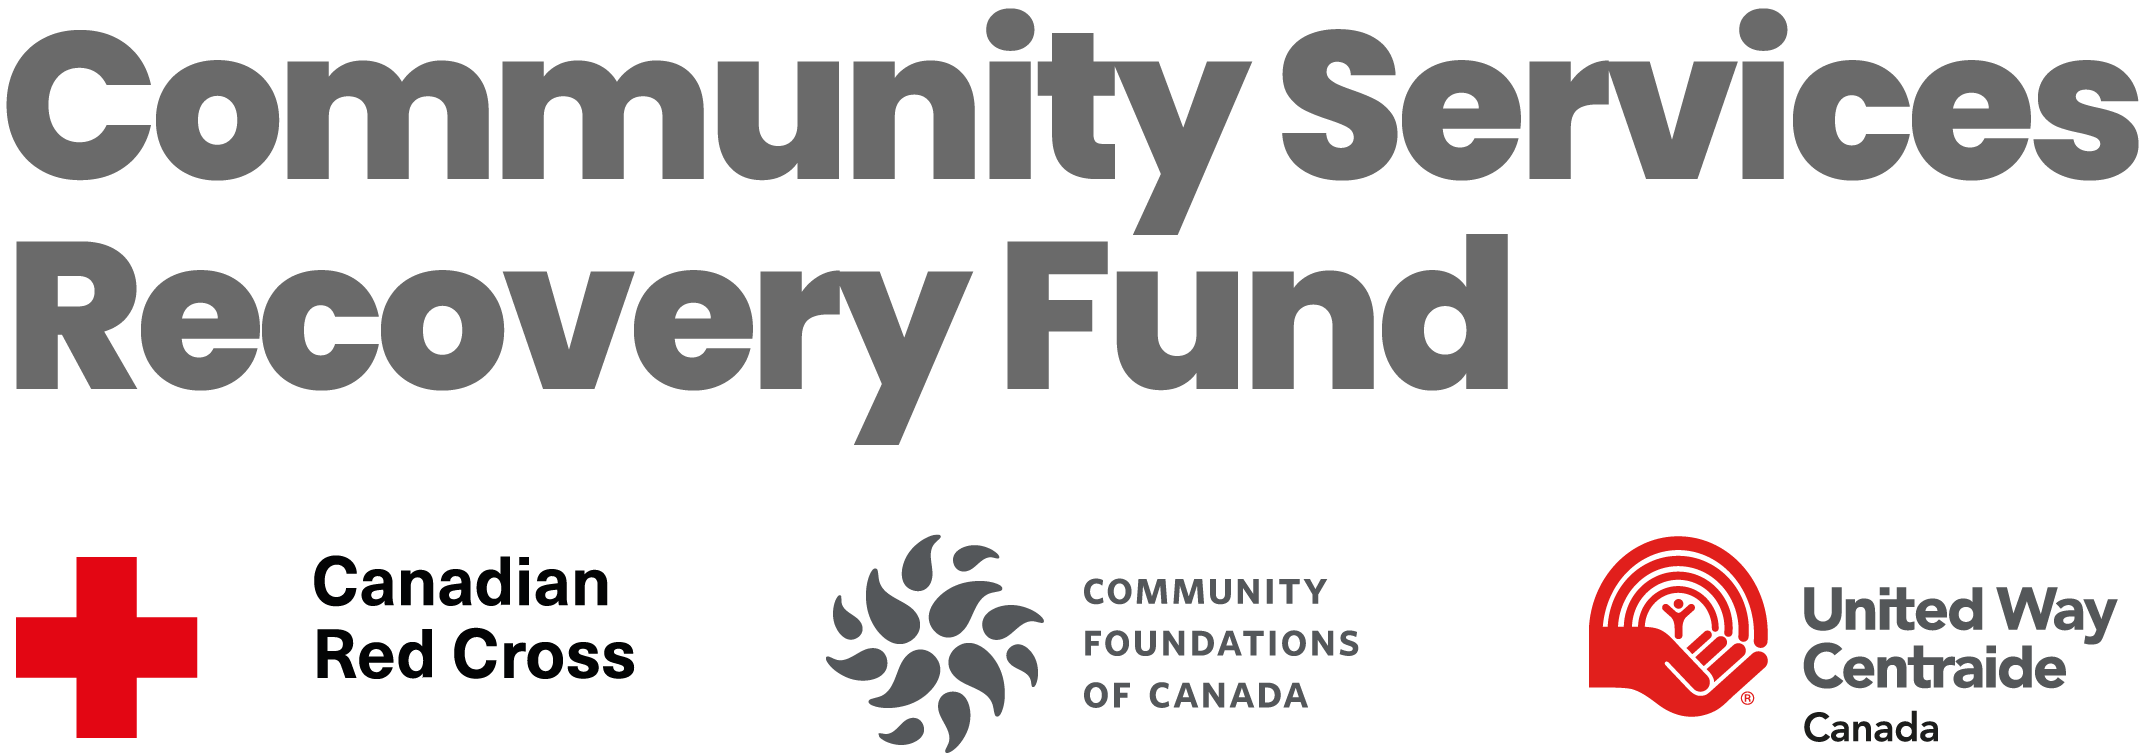 Community Services Recovery Fund, Canadian Red Cross, Community Foundations of Canada, United Way Centraide Canada